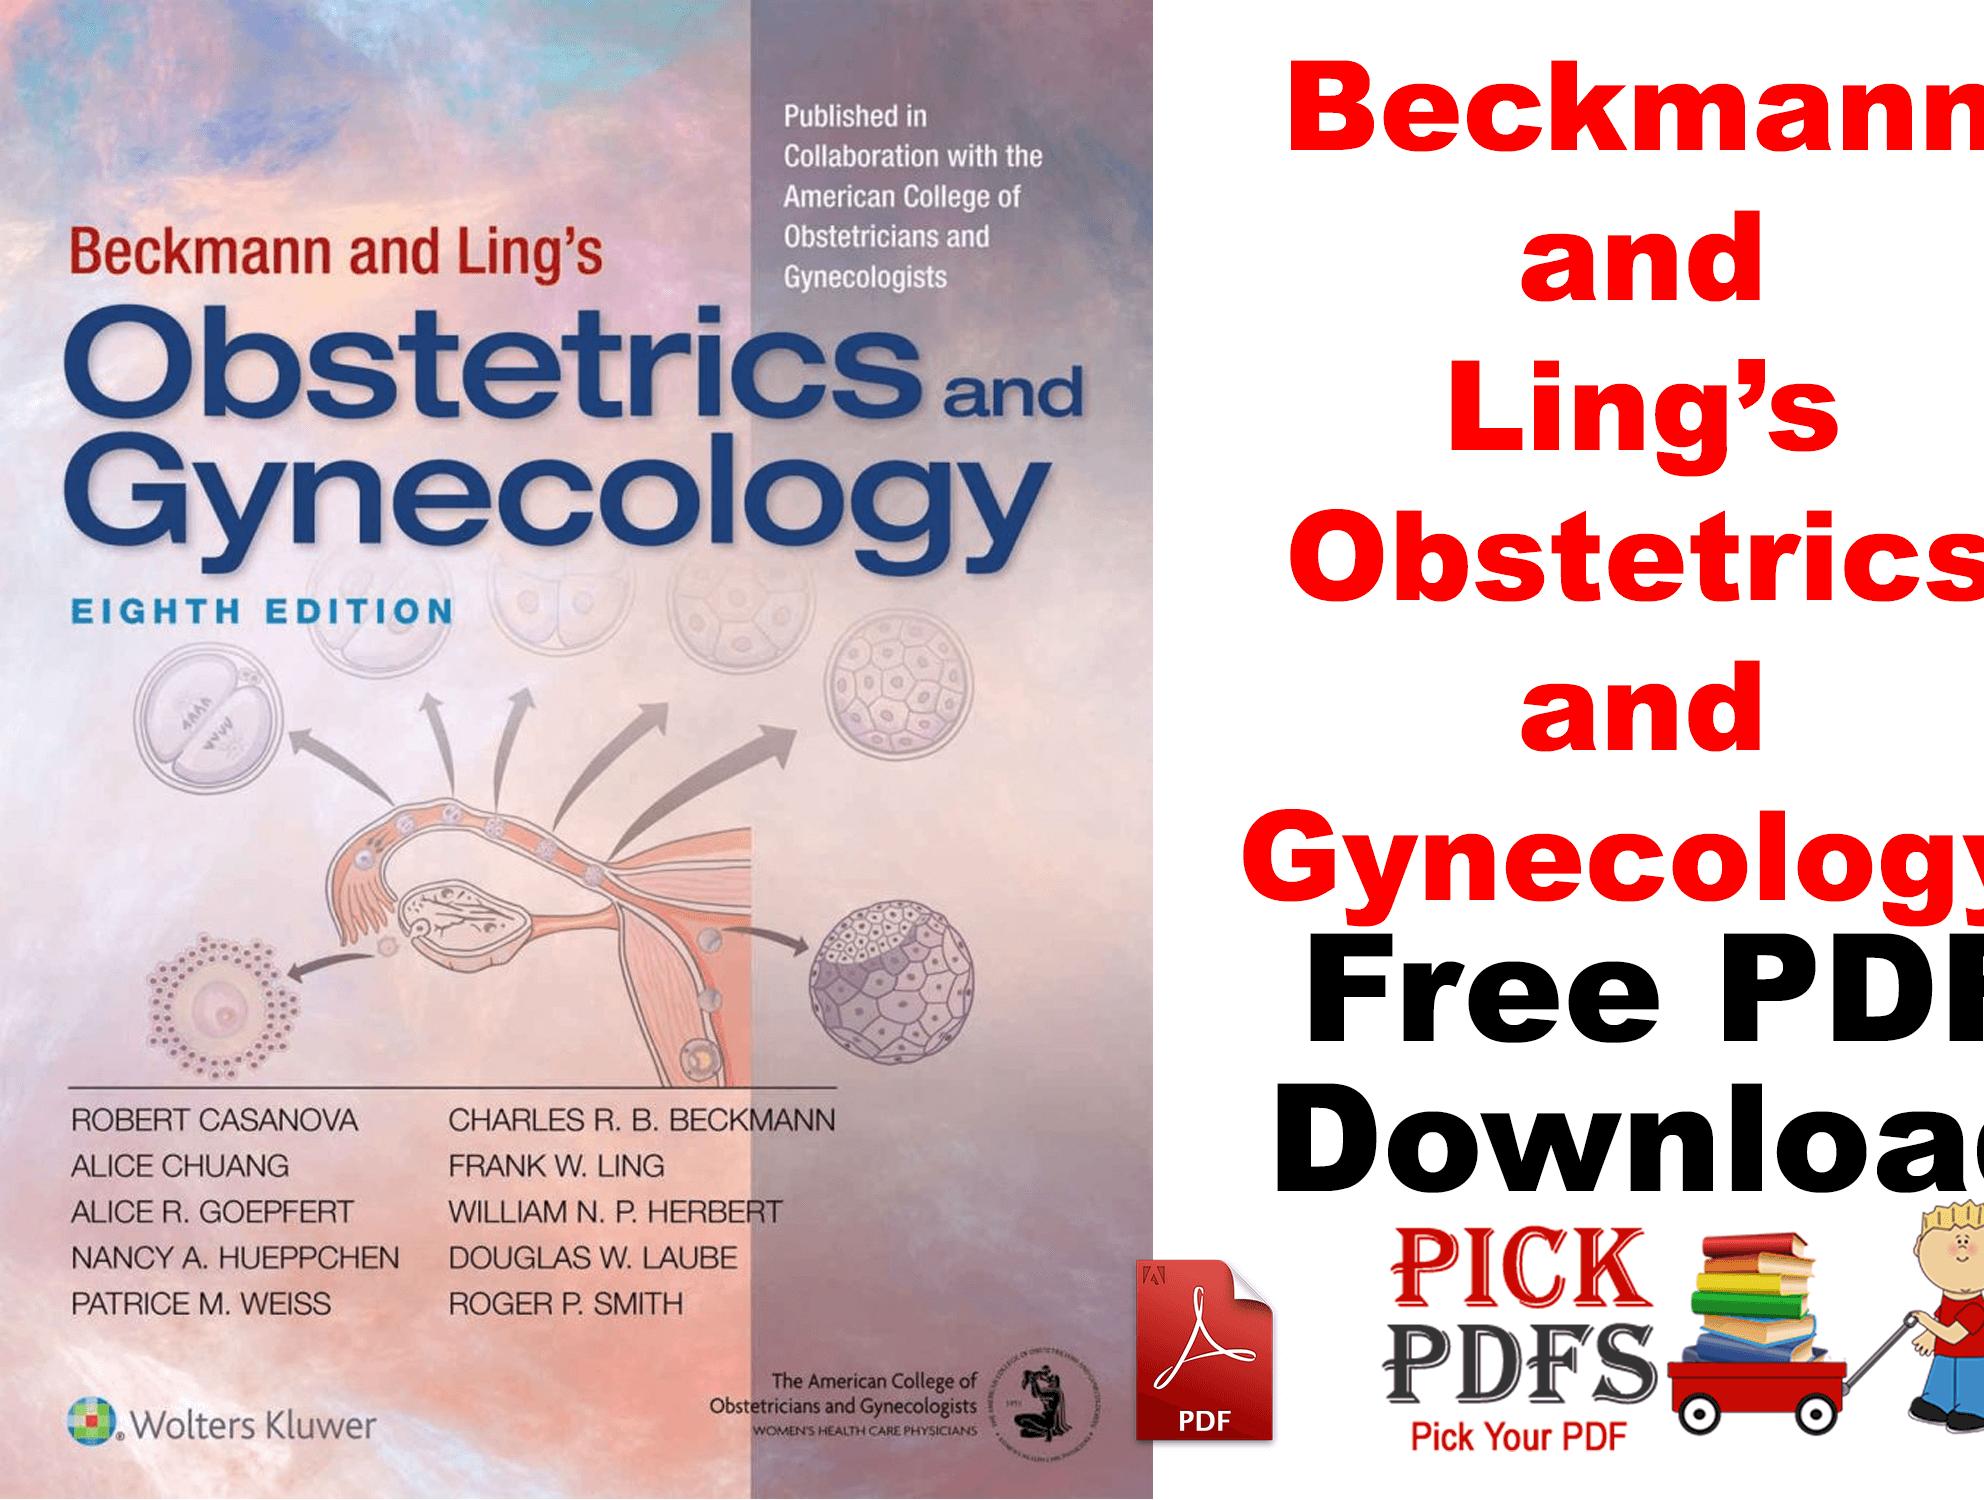 https://pickpdfs.com/beckmann-and-lings-obstetrics-and-gynecology-8th-edition-free-pdf/